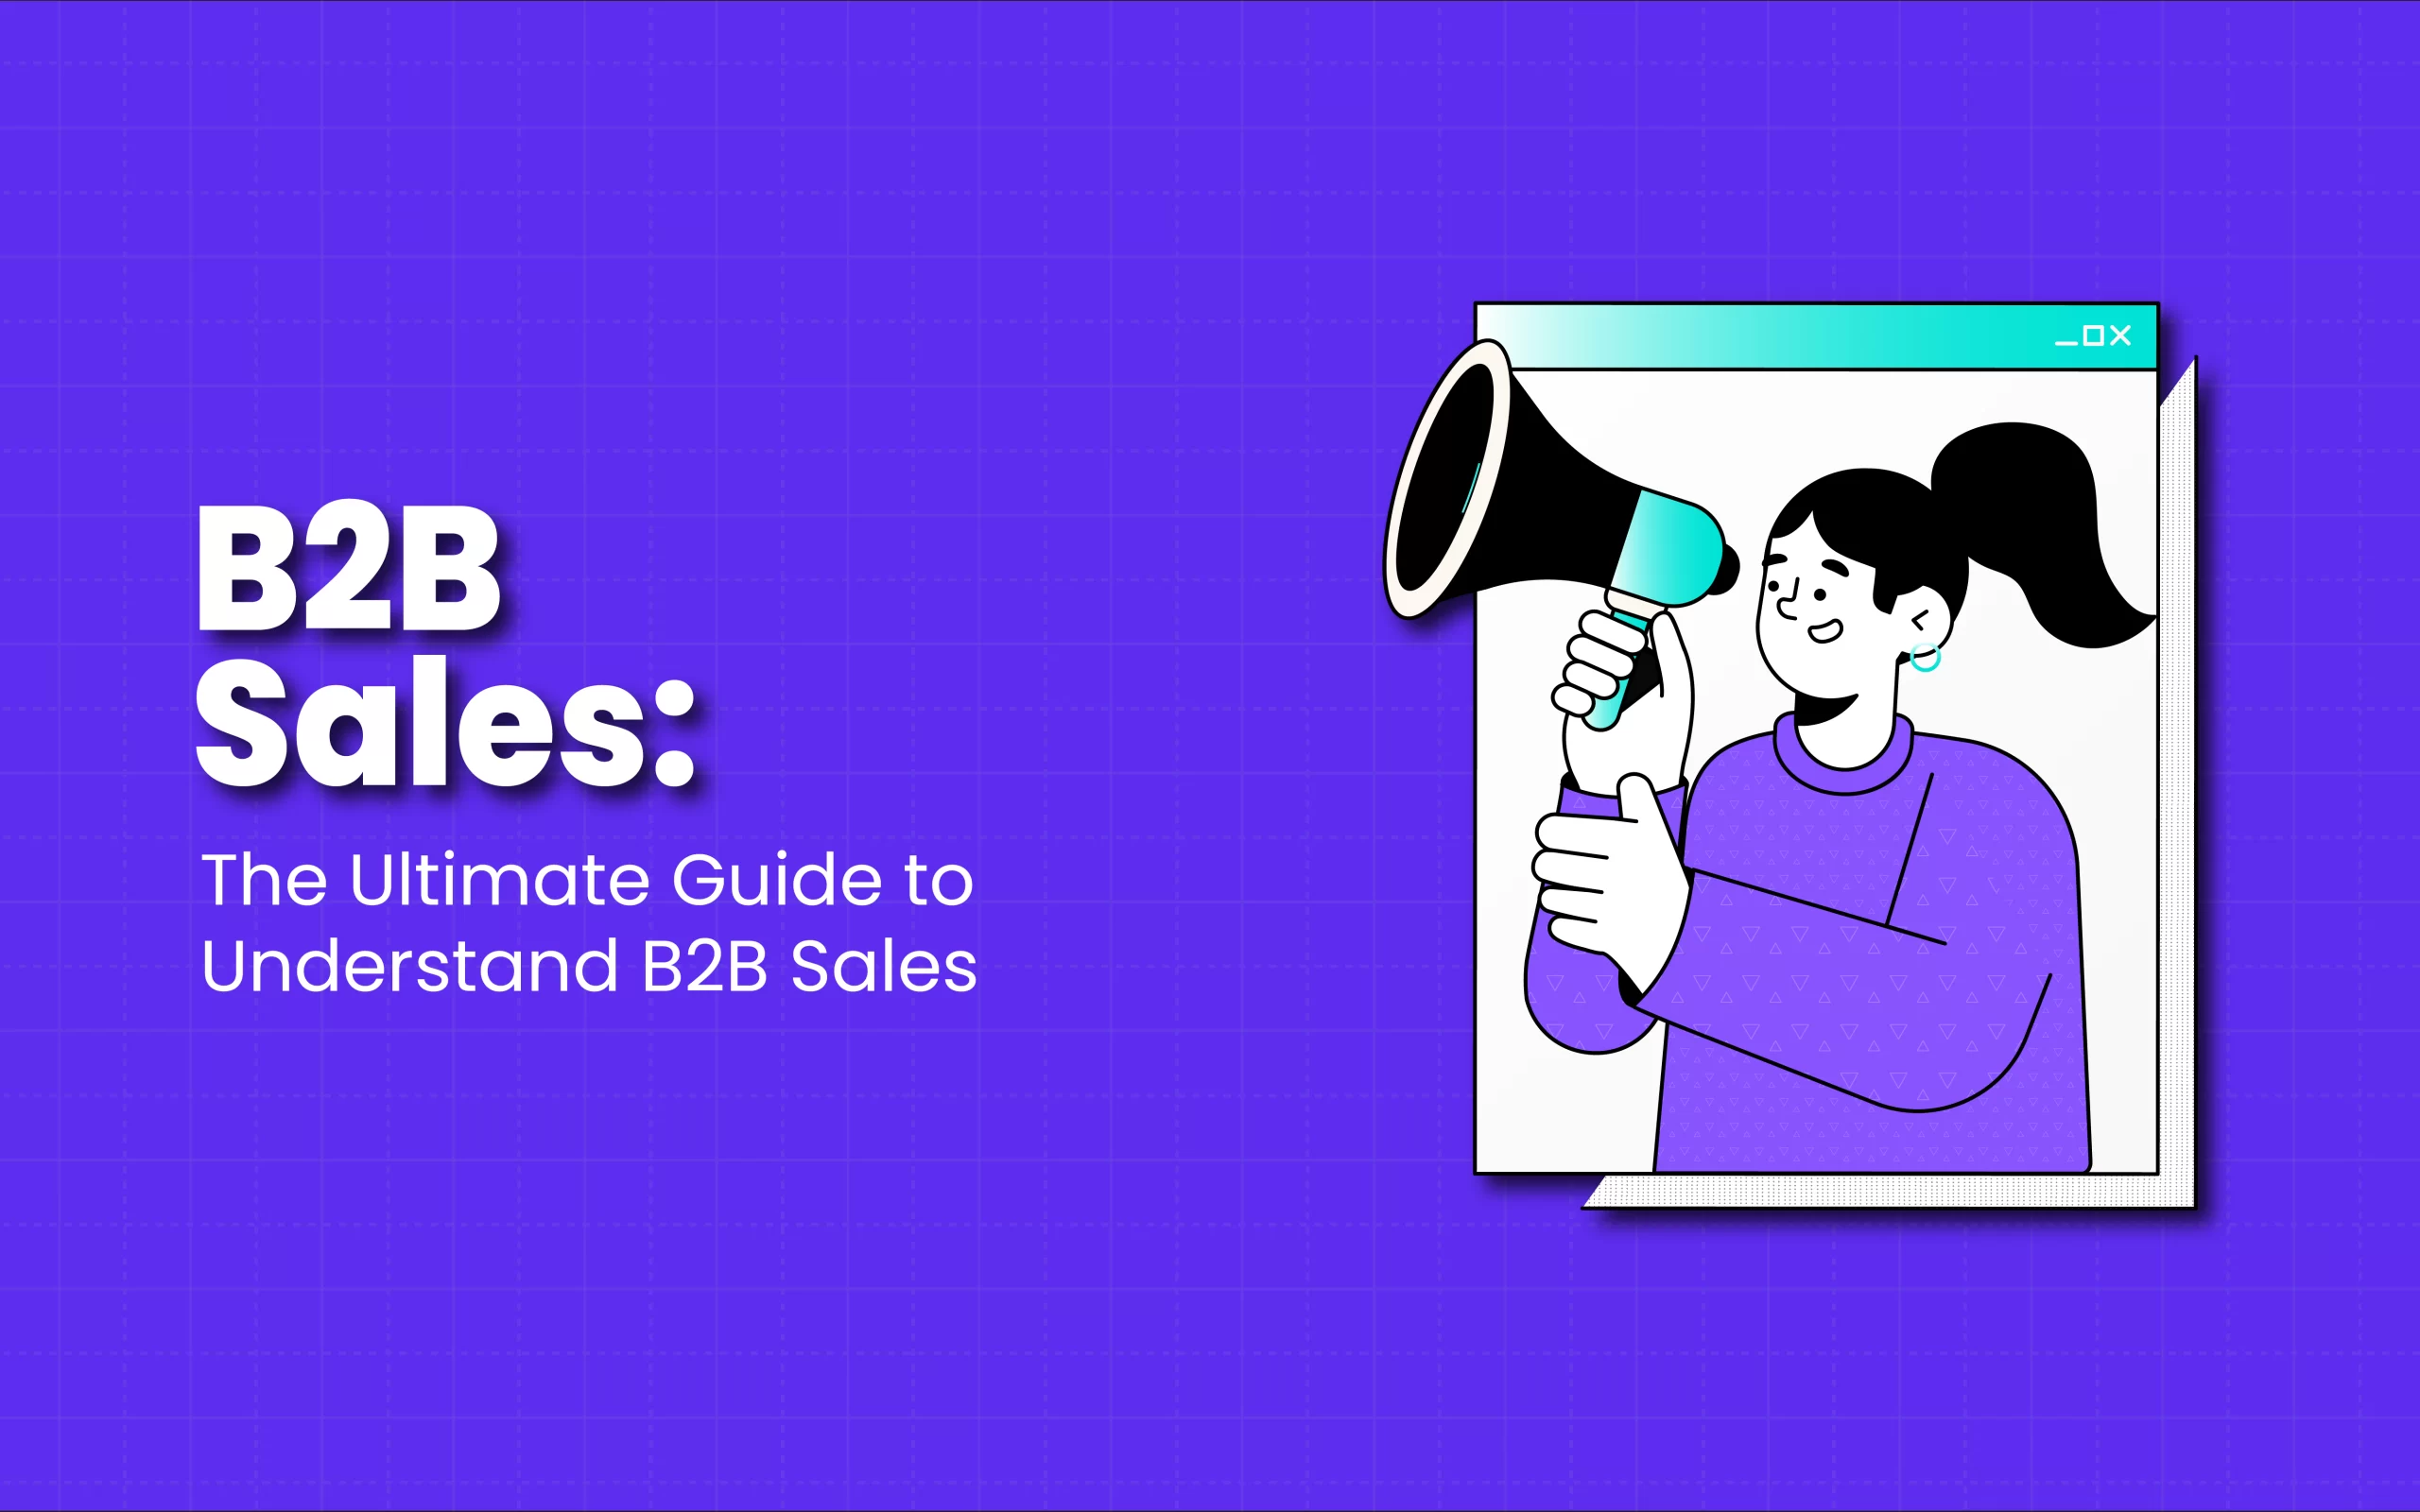 The Ultimate Guide to Understand B2B Sales